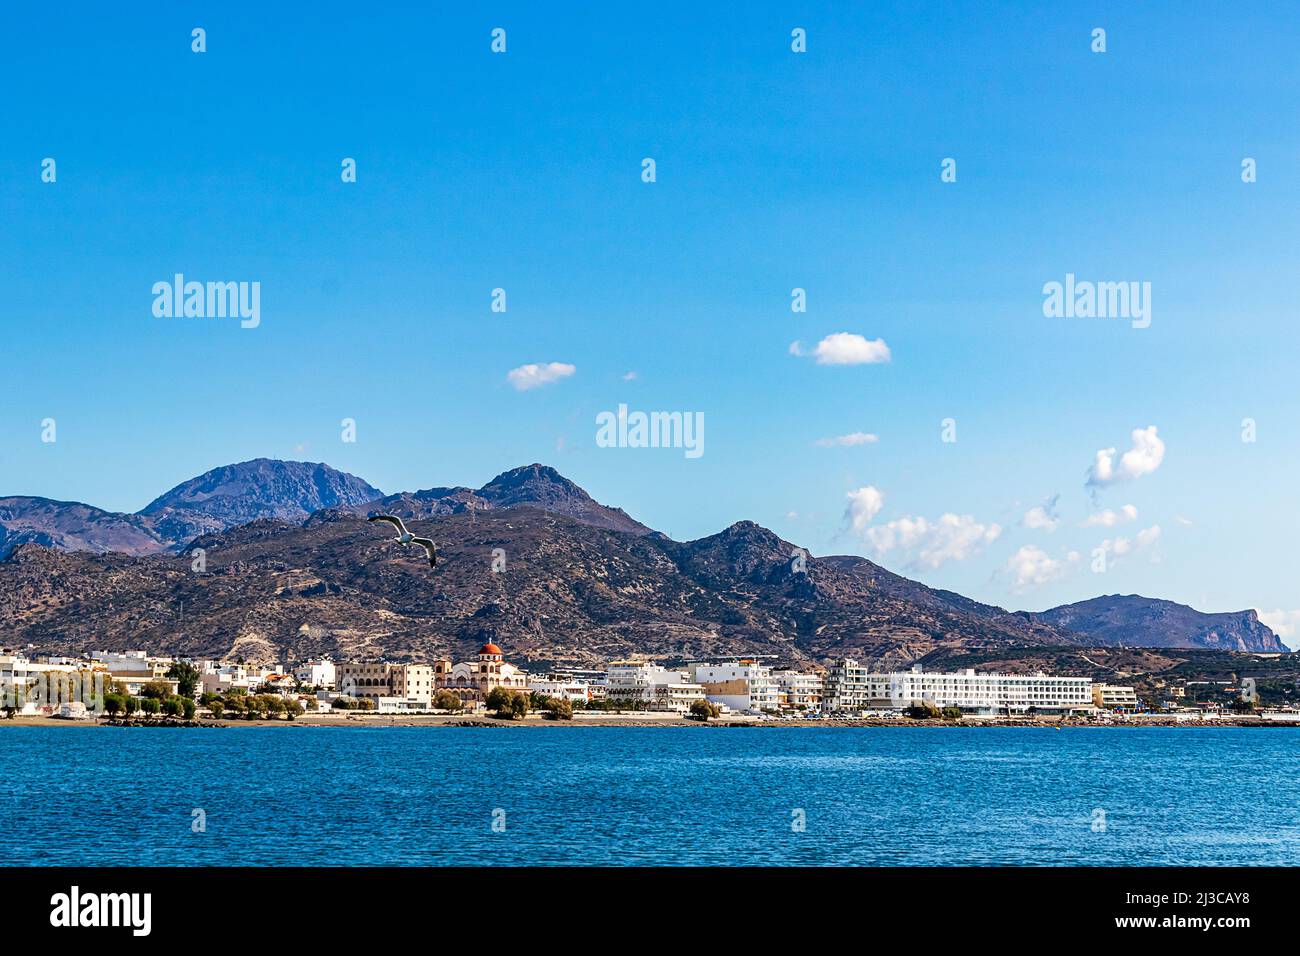 The harbour of Ierapetra with views towards the mountains. Ierapetra is the largest town on the south coast of Crete Island, Greece, Europe. Stock Photo